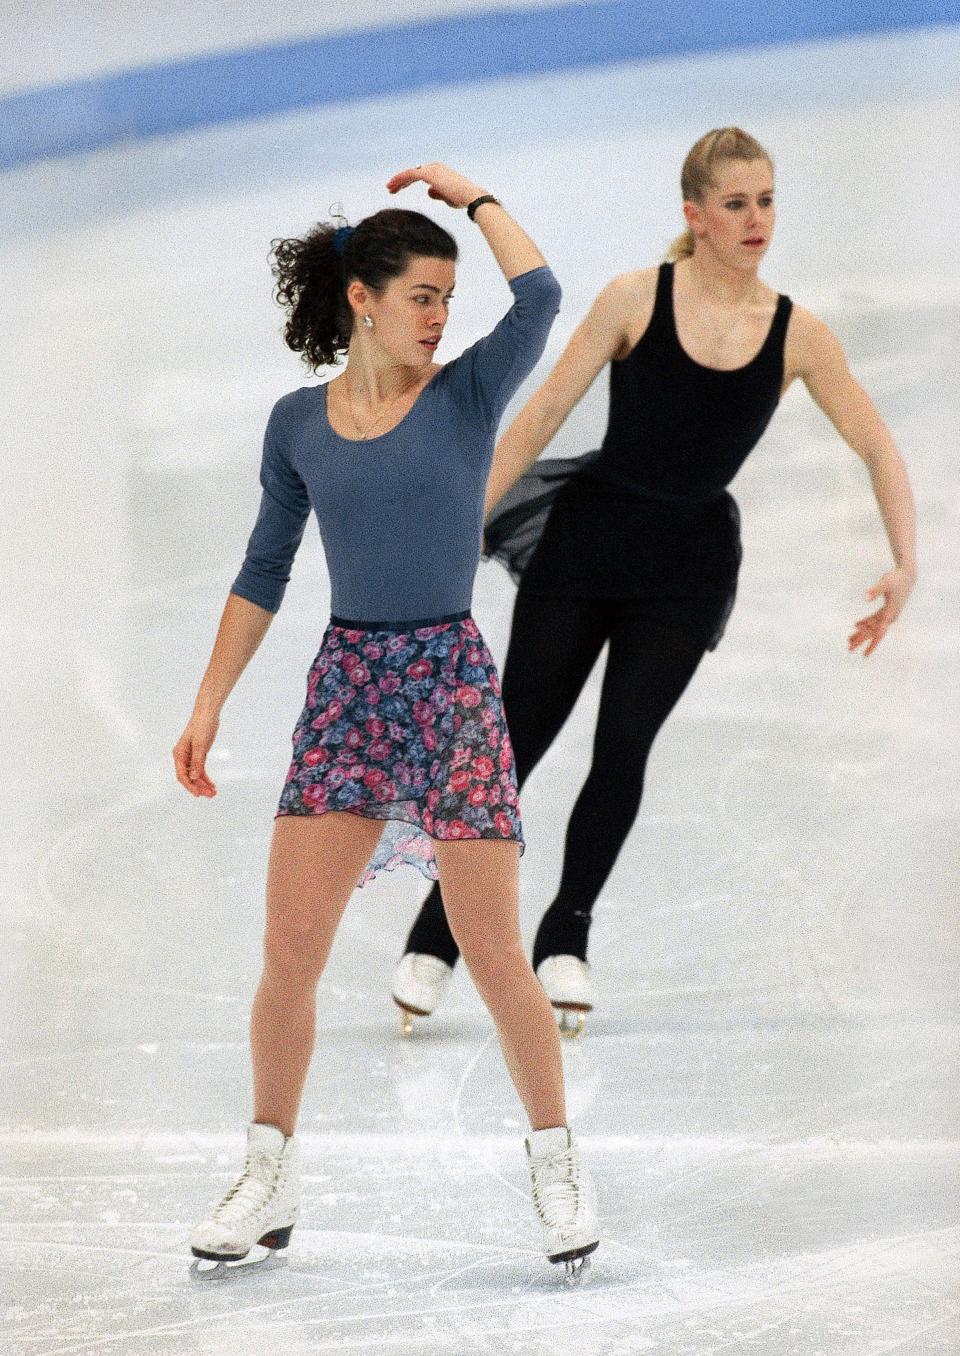 In this Feb. 22, 1994, file photo, American figure skaters Nancy Kerrigan, left, and Tonya Harding work out during an Olympic practice session at Hamar Olympic Amphitheater in Hamar, Norway. it's been nearly 20 years since Kerrigan was clubbed after practice in Detroit by a member of a bumbling goon squad hired by Harding's ex-husband with the hope of eliminating his former wife's top competition for the U.S. Olympic team. The assault led to a soap opera that practically created tabloid television journalism, taking what had for decades been a niche sport and putting it squarely into the media mainstream. By the time a recovered Kerrigan and a besieged Harding reached Lillehammer, their saga was front-page news and can't-miss TV. 